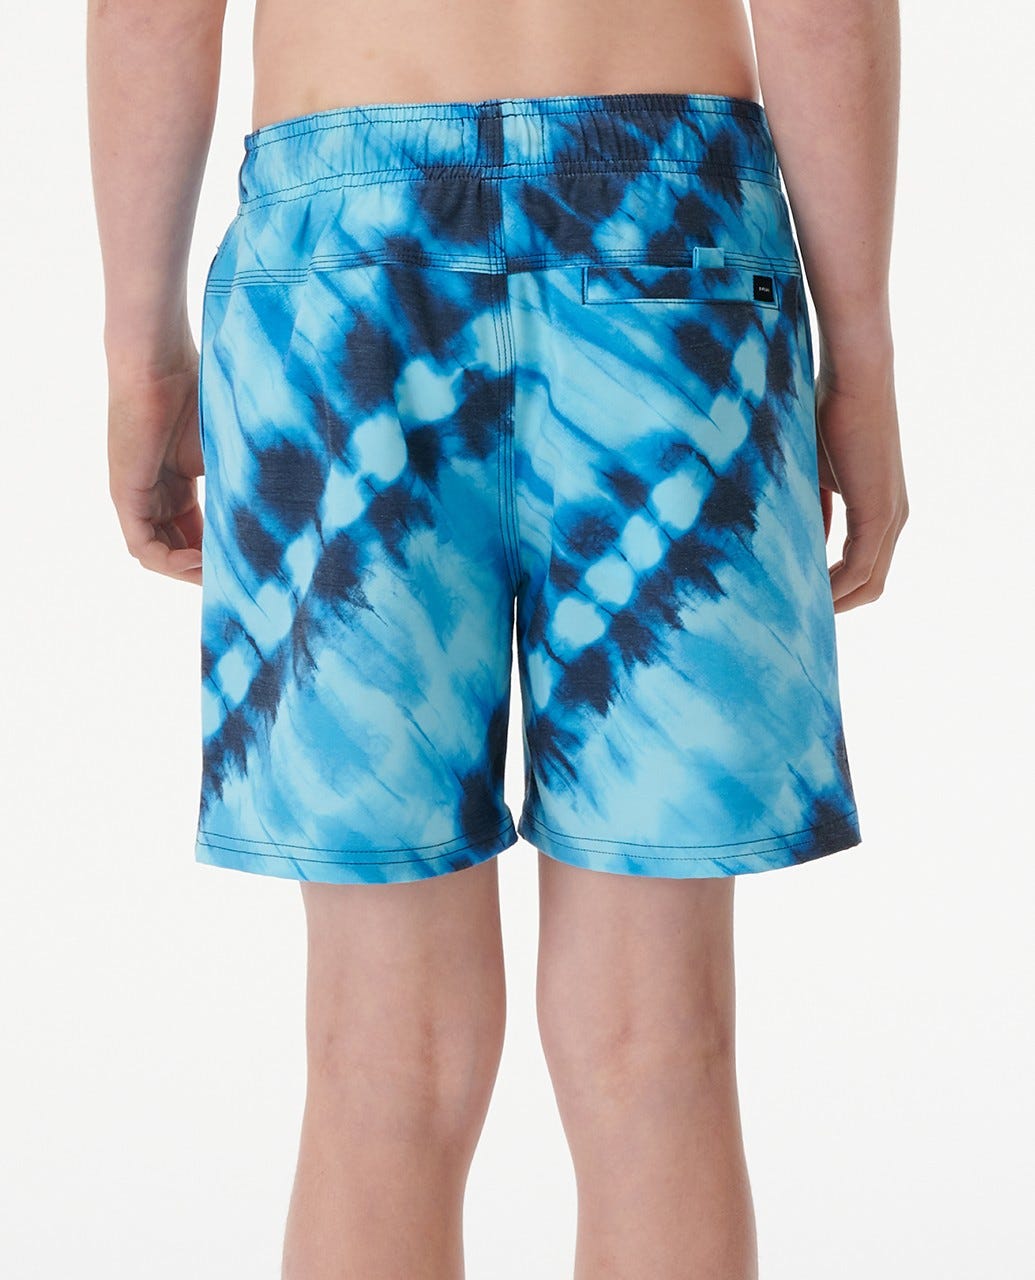 RIP CURL PARTY PACK VOLLEY KBOTW9-0070 BOARDSHORT (YB)